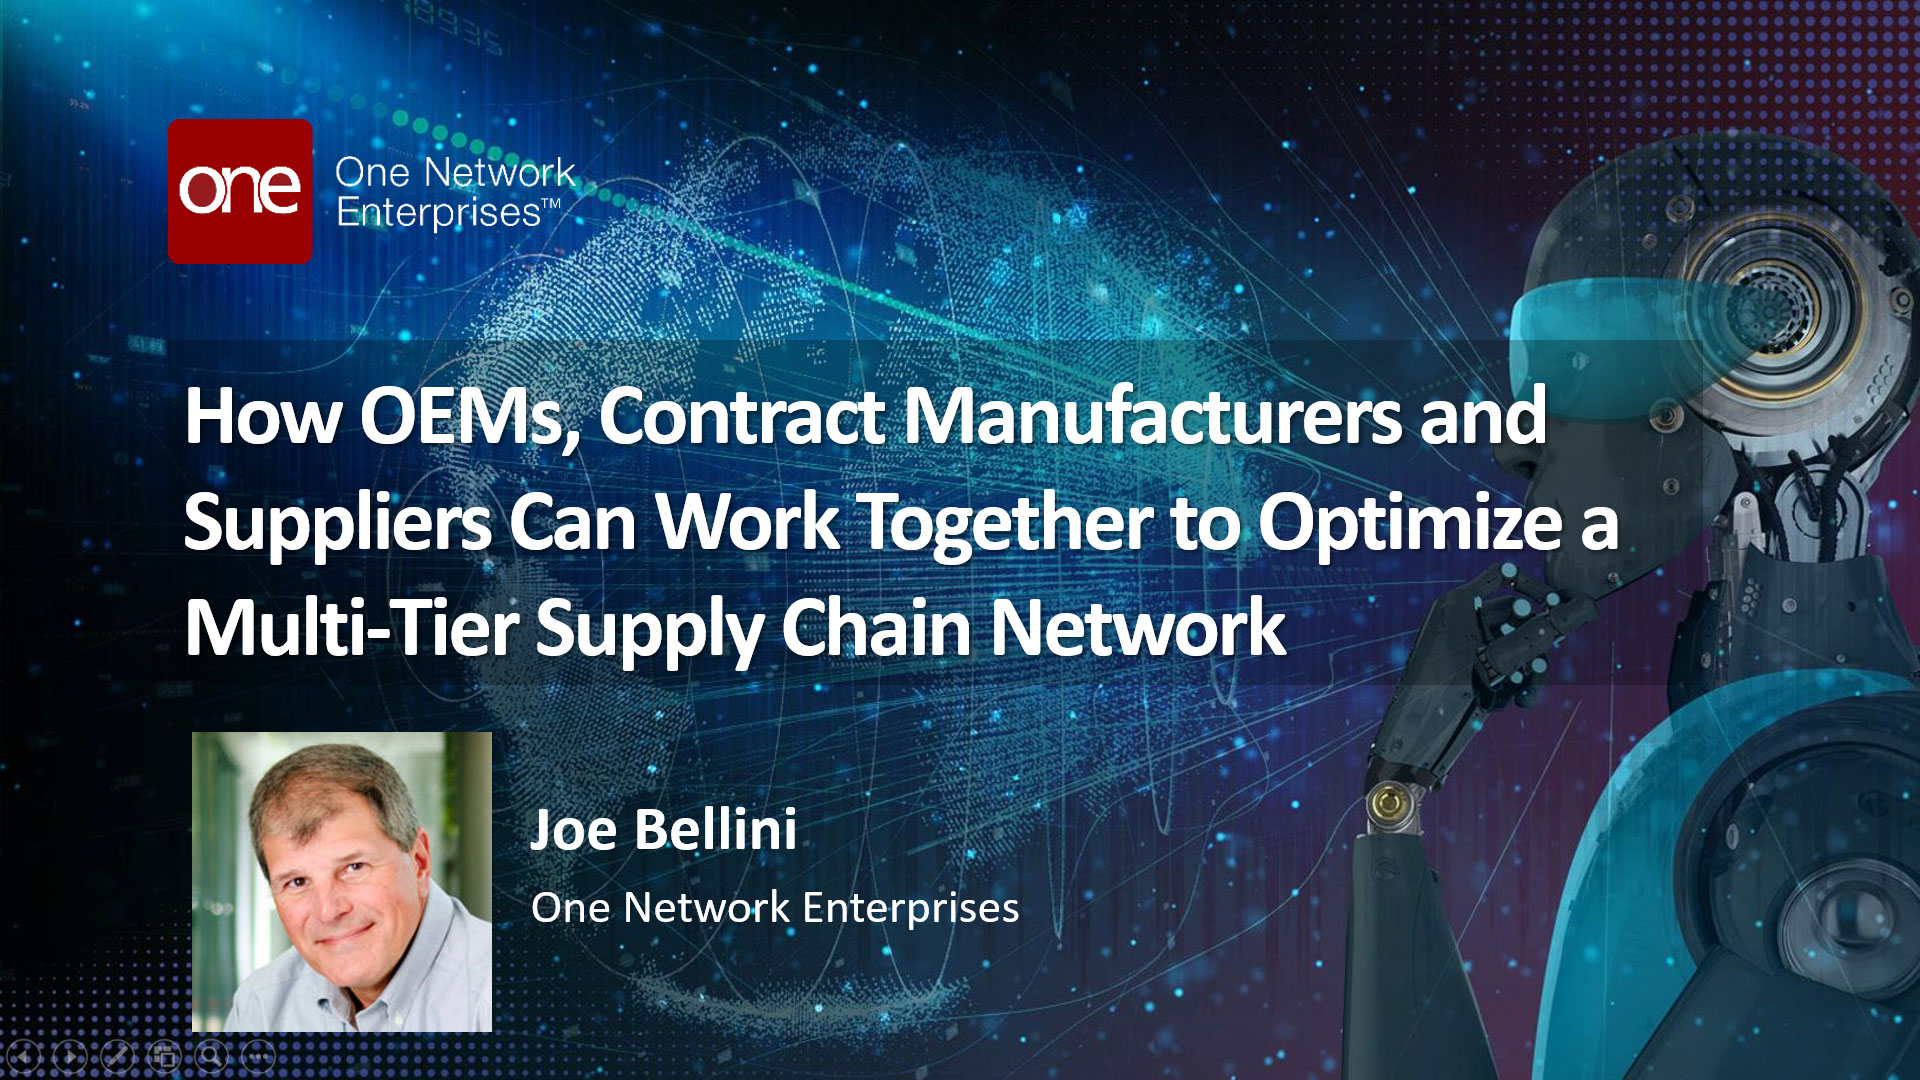 Download the Presentation: Optimizing Multi-Tier Supply Chain Networks